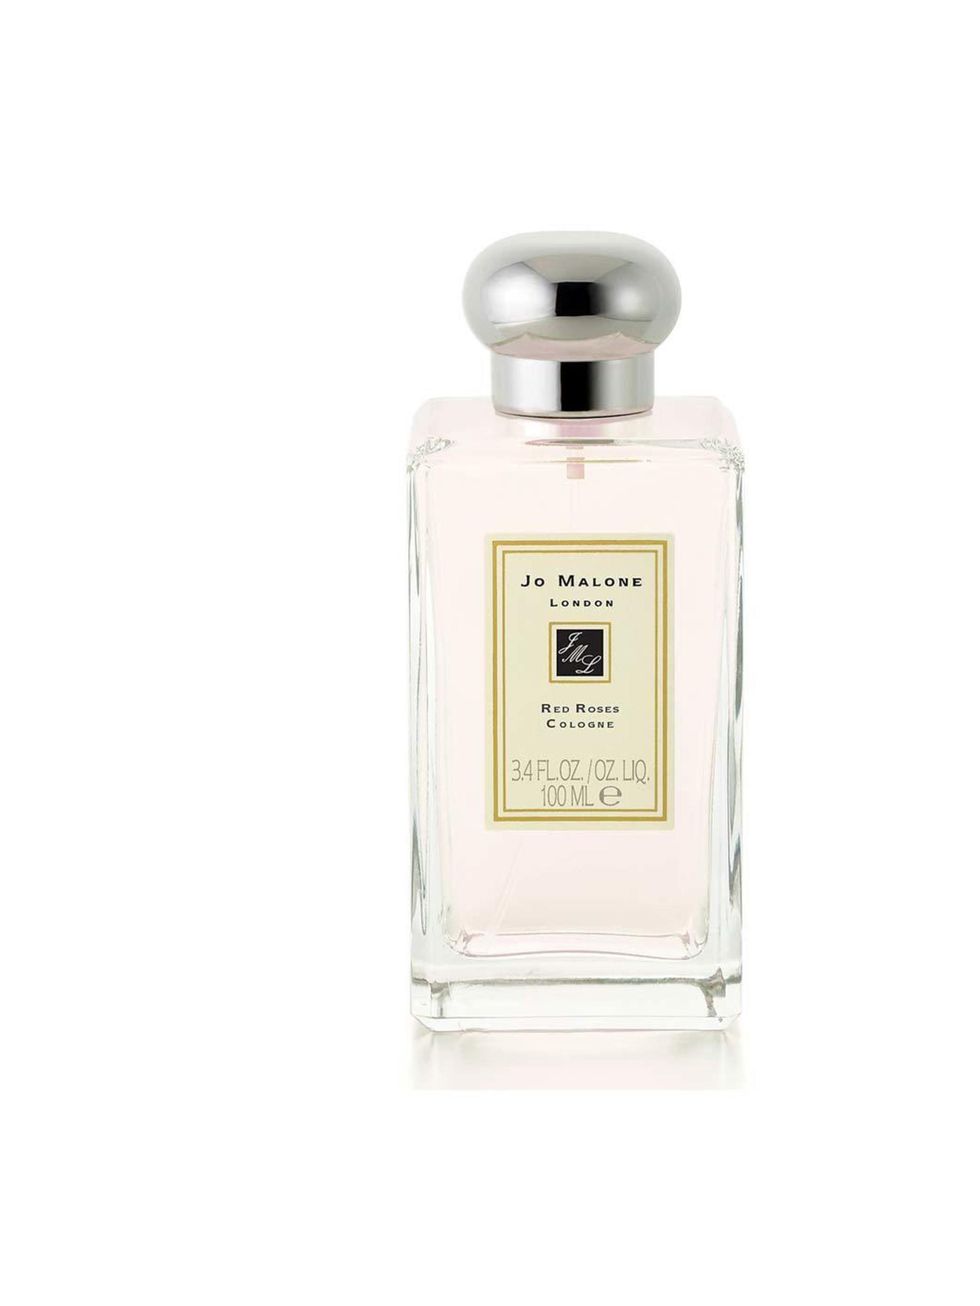 <p><a href="http://www.jomalone.co.uk/product/3588/10066/Fragrances/Colognes/Light-Floral/Red-Roses/Red-Roses/Cologne/index.tmpl">Jo Malone Red Roses Cologne, £38 30ml, £76 100ml</a></p><p>Sure, a £38 bunch of roses is a lovely gift - but they only last a